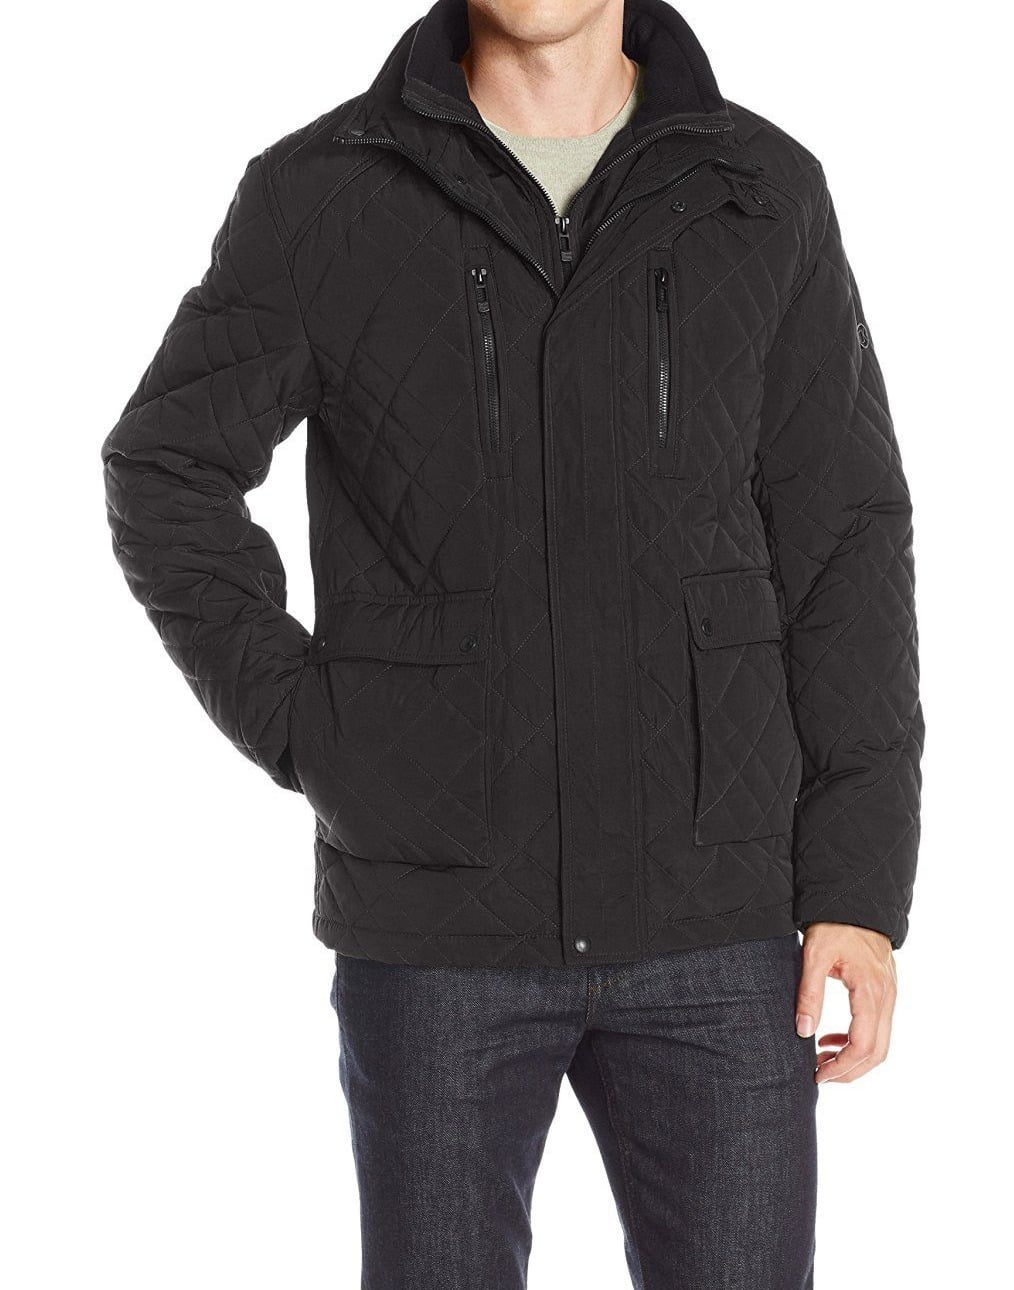 Calvin Klein - Calvin Klein NEW Black Mens Size Large L Quilted Full ...